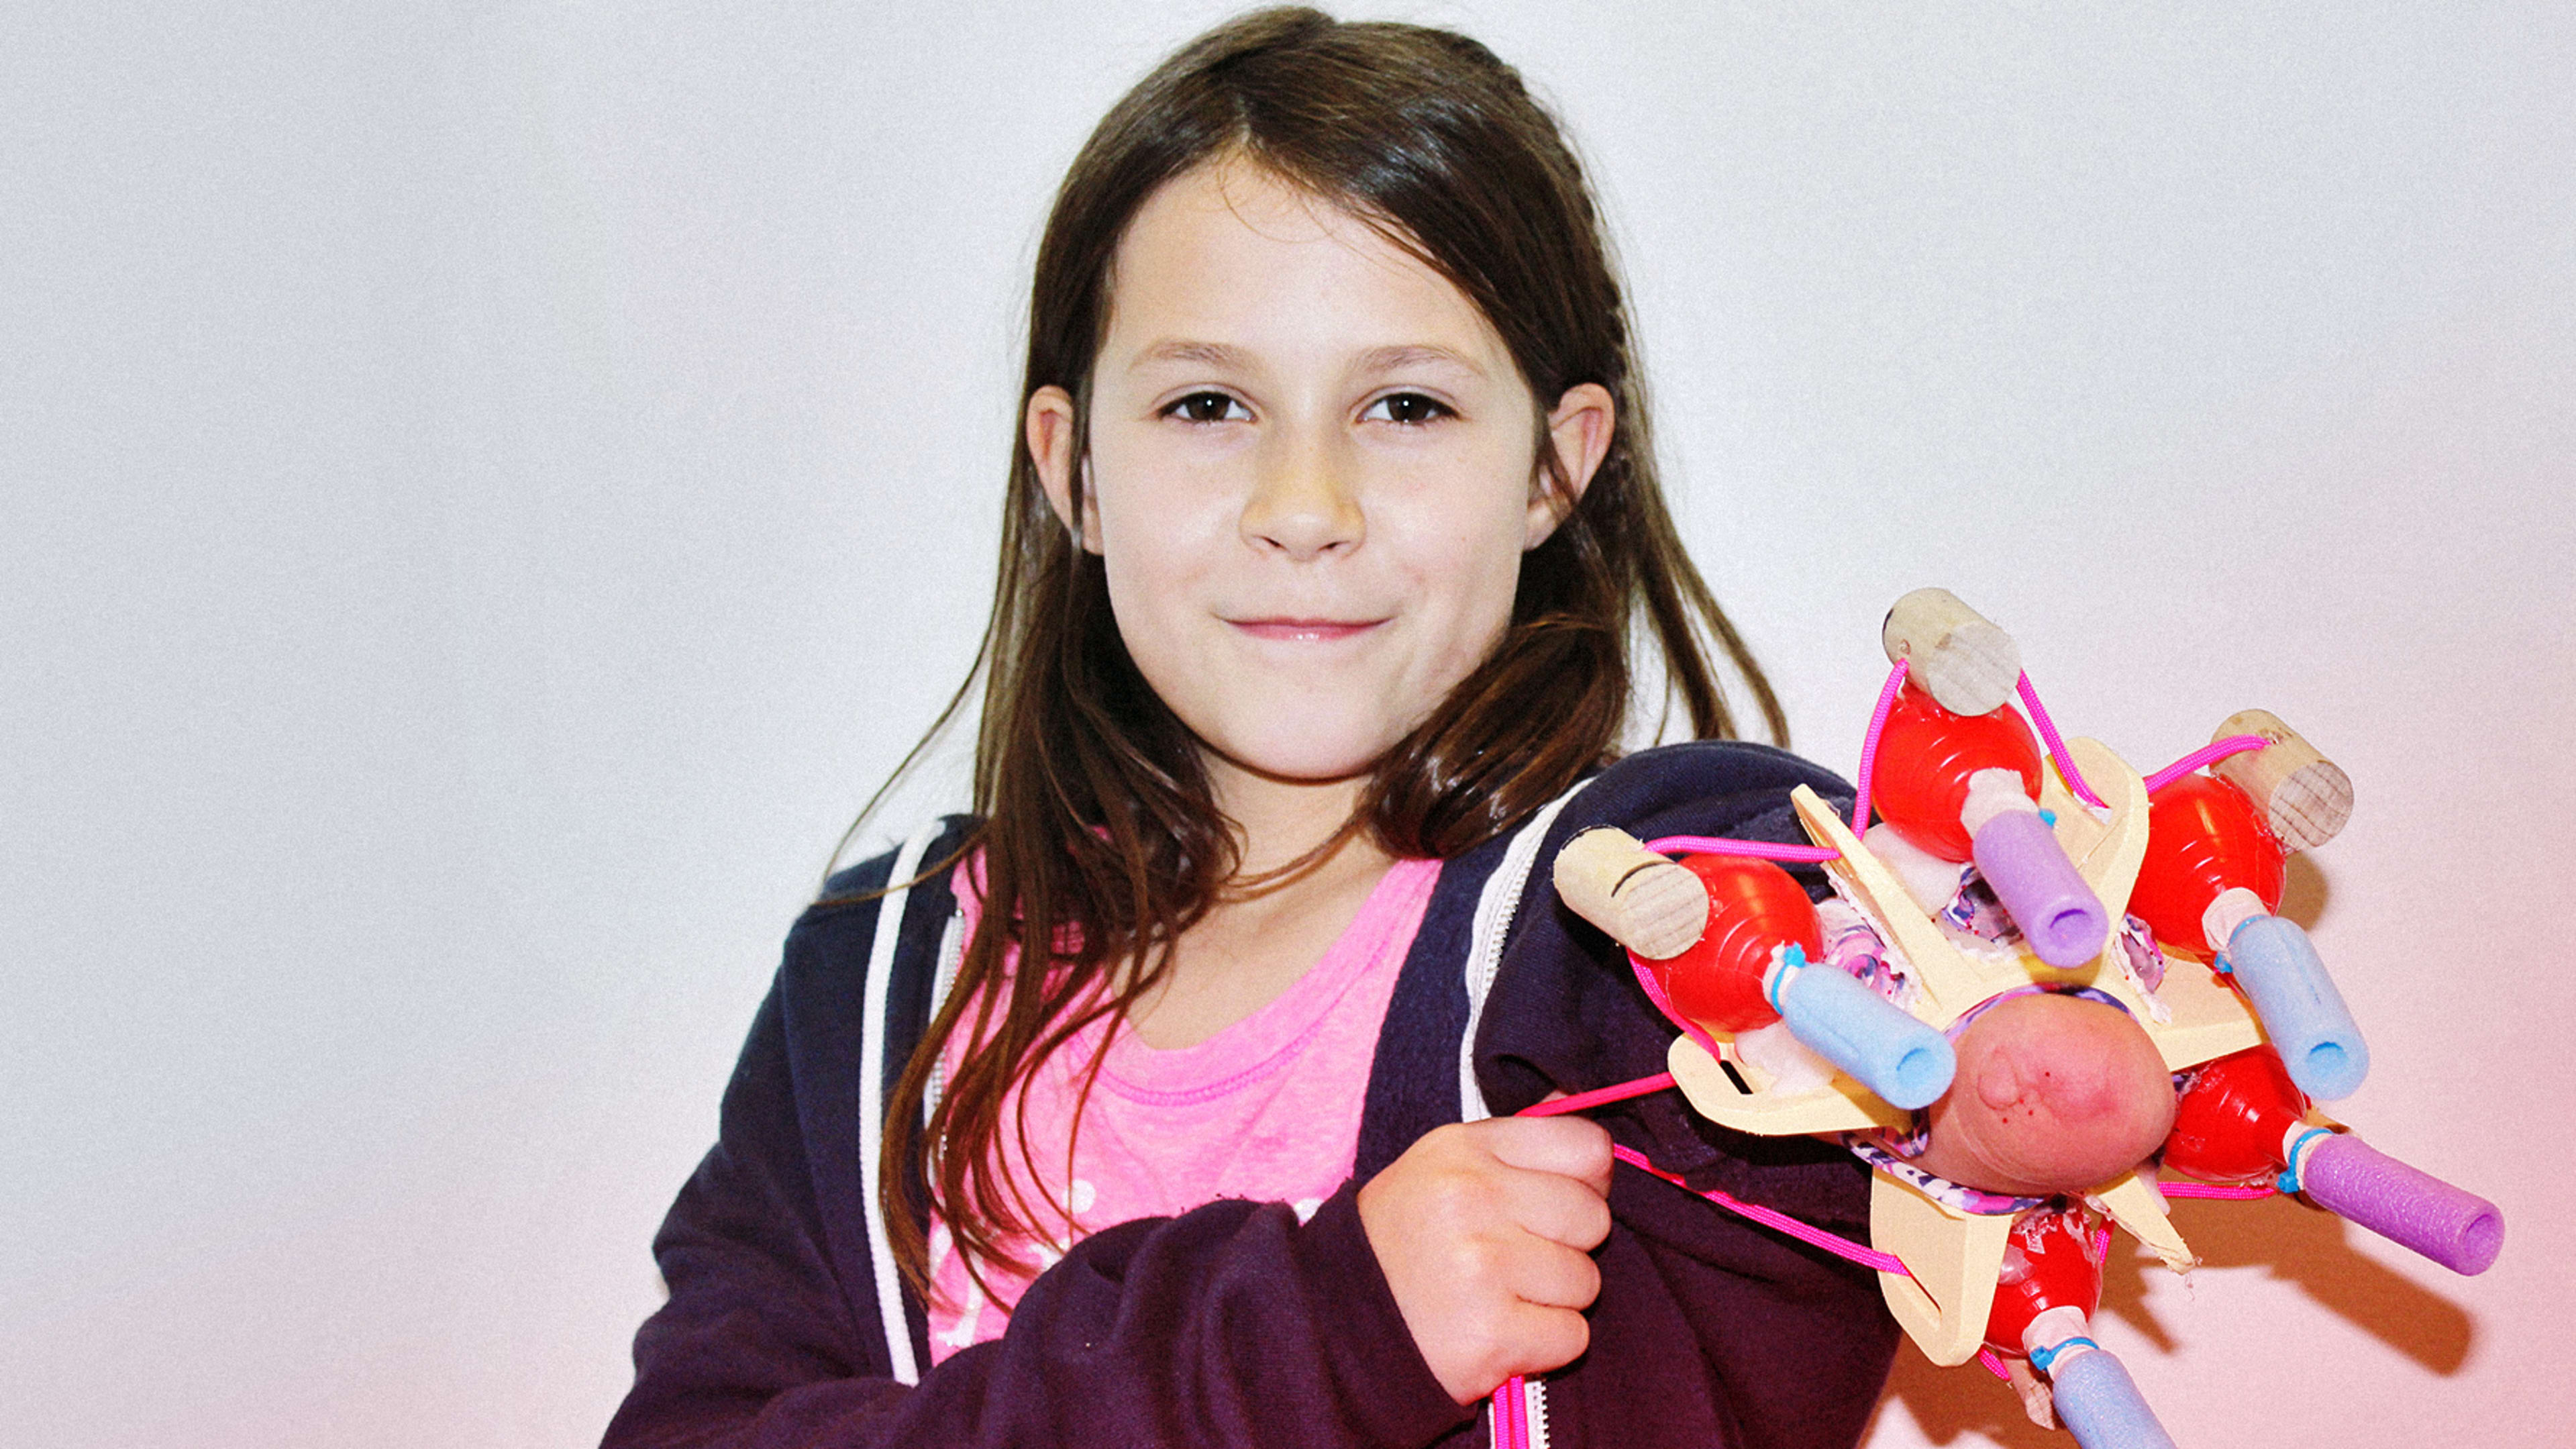 This Girl Designed Her Own Superhero Prosthetic Arm, And It Shoots Sparkles